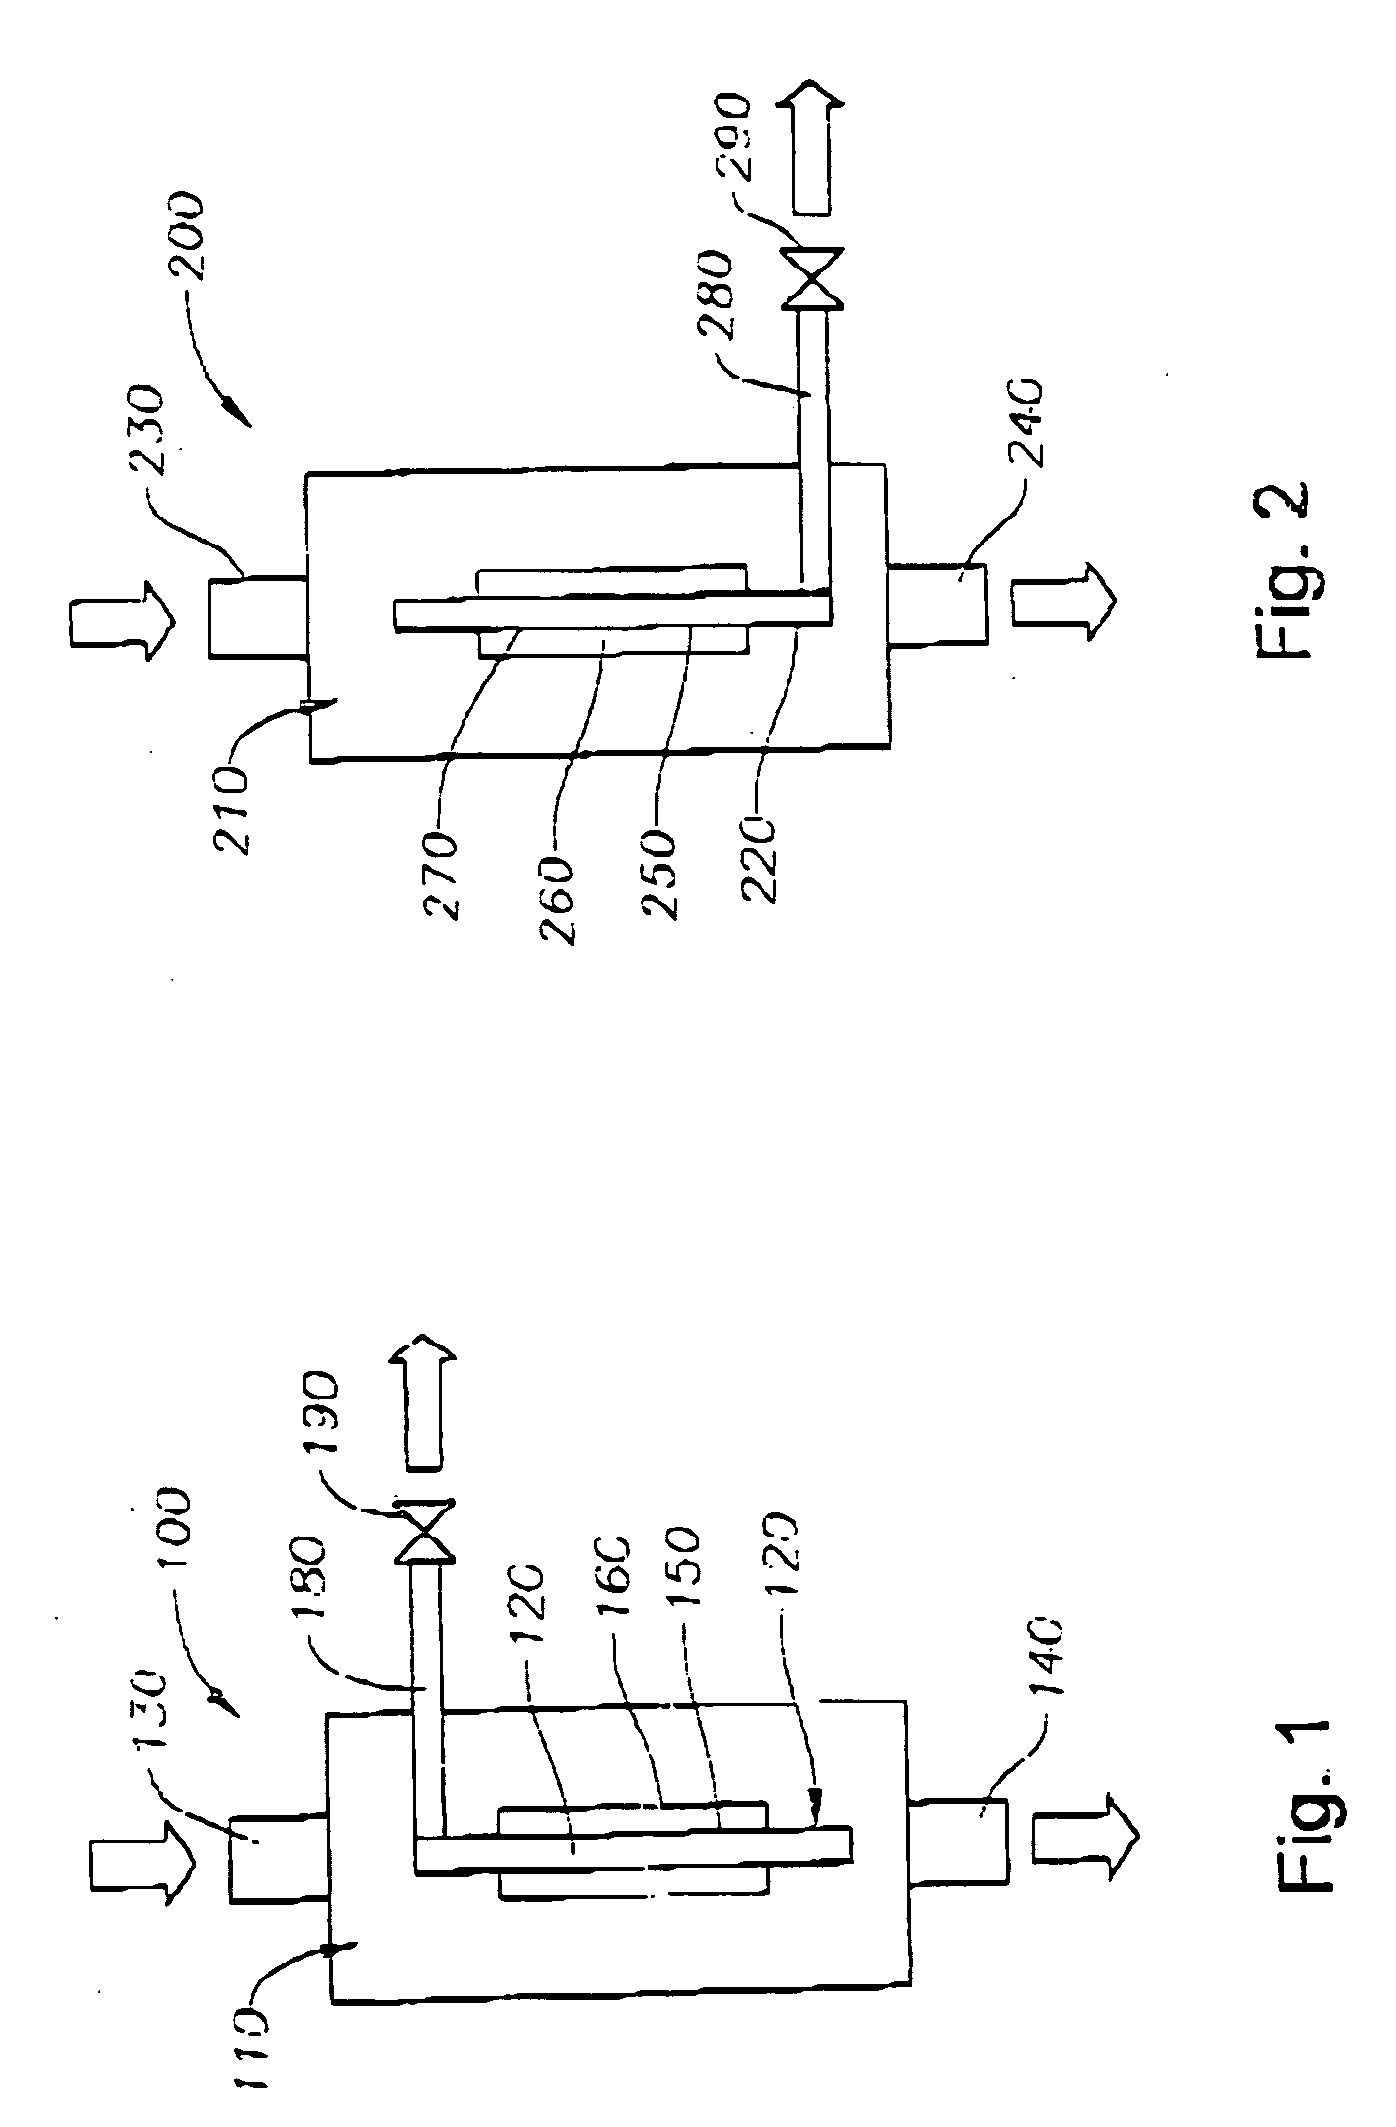 Solid/liquid separation system for multiphase converters